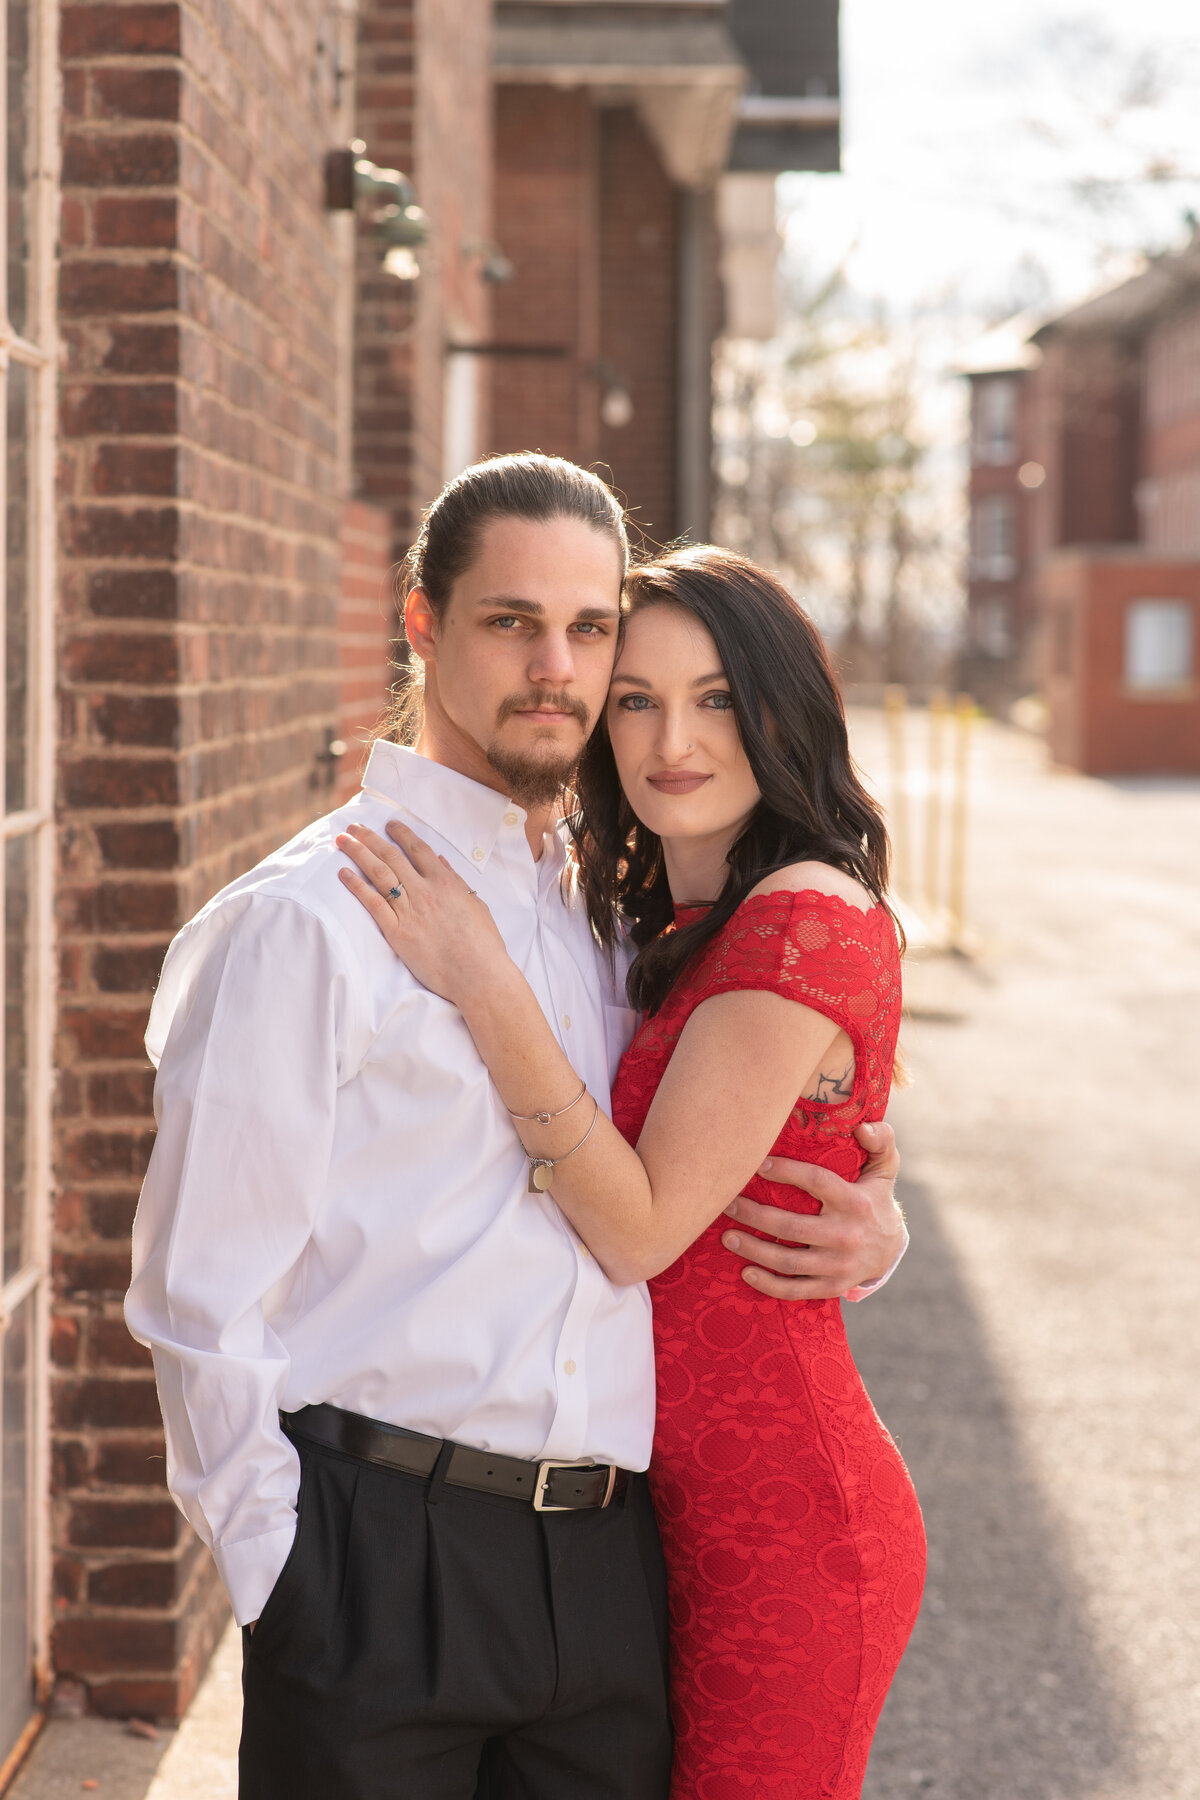 Engaged couple in dressy attire with brick buildings around them